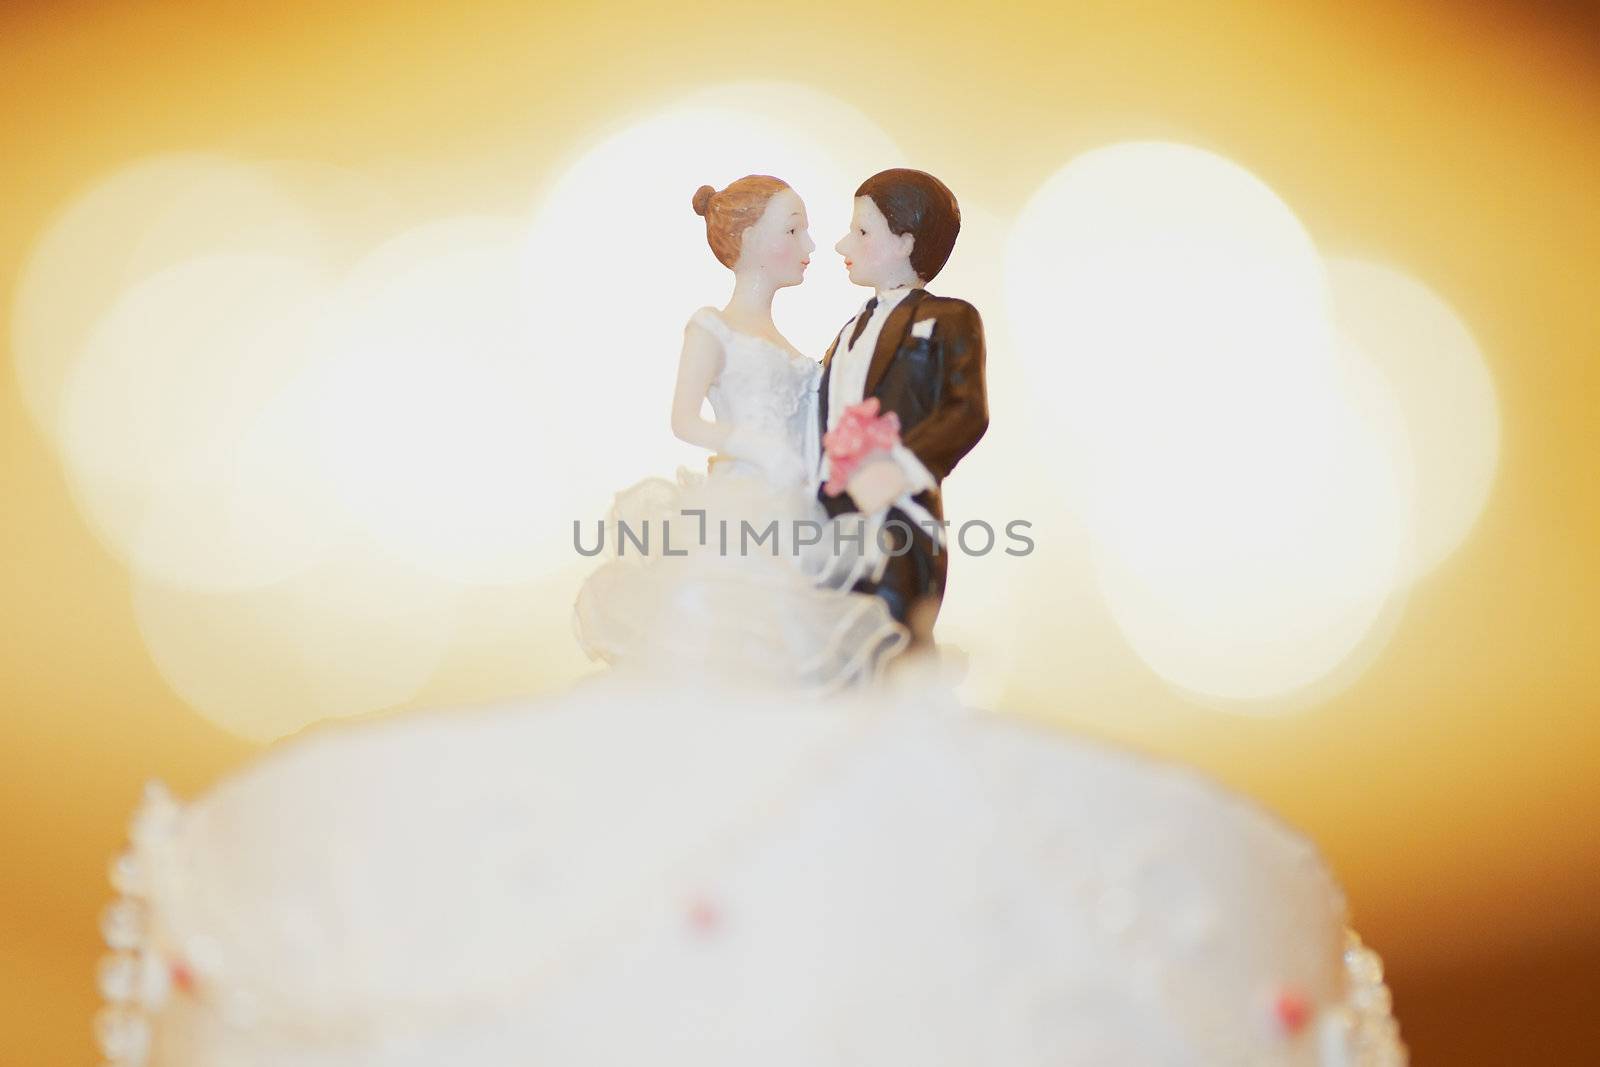 Figurines of bride and groom on a wedding cake by the bright light